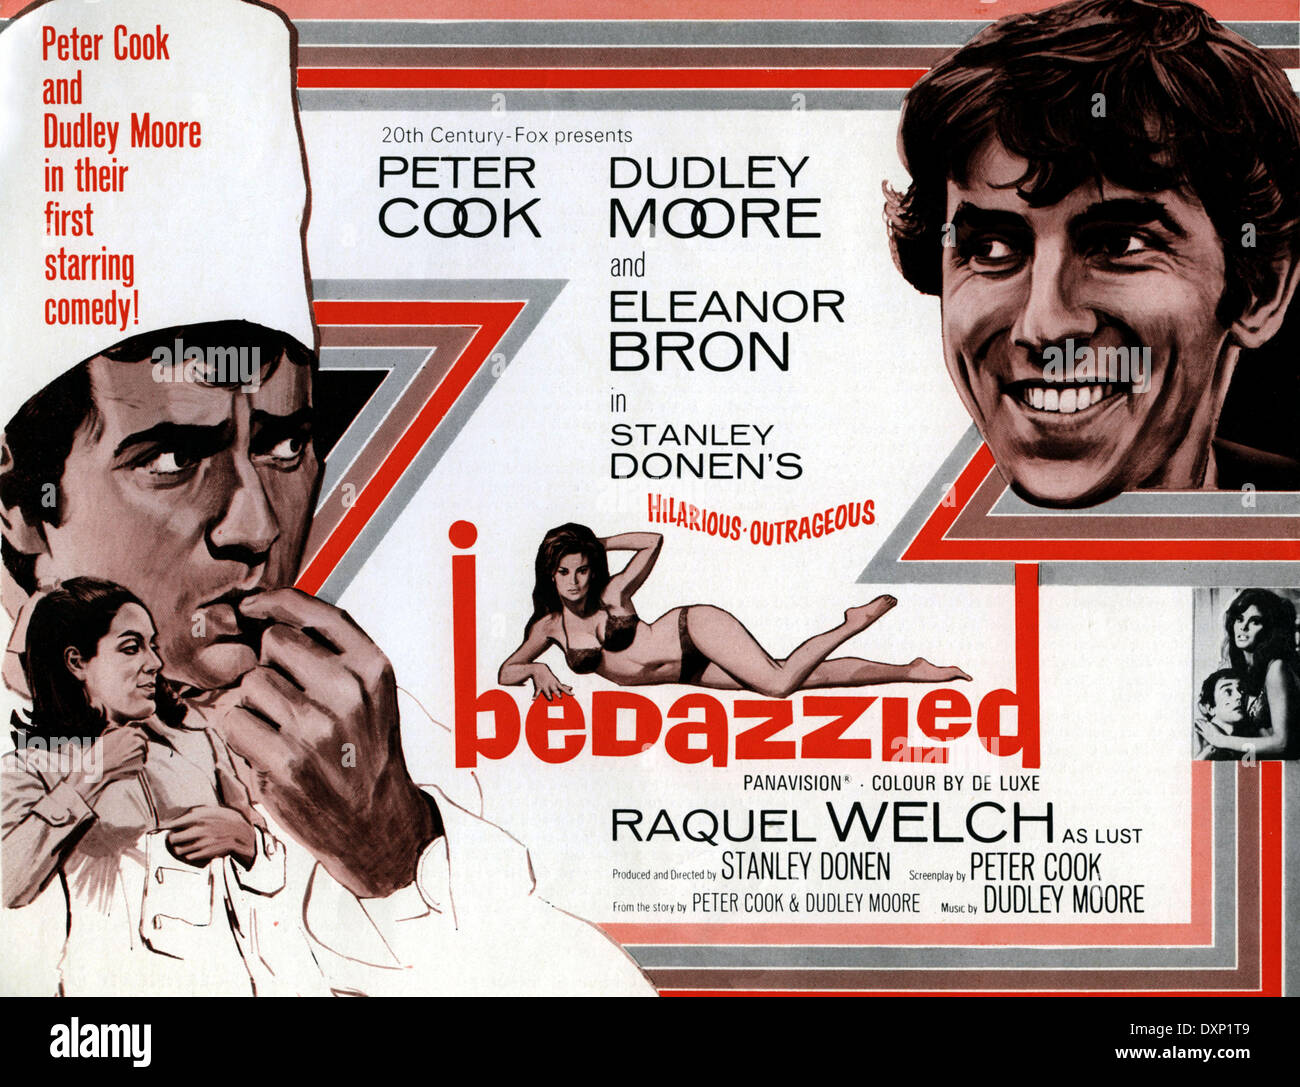 Bedazzled - 1967 - Peter Cook and Dudley Moore